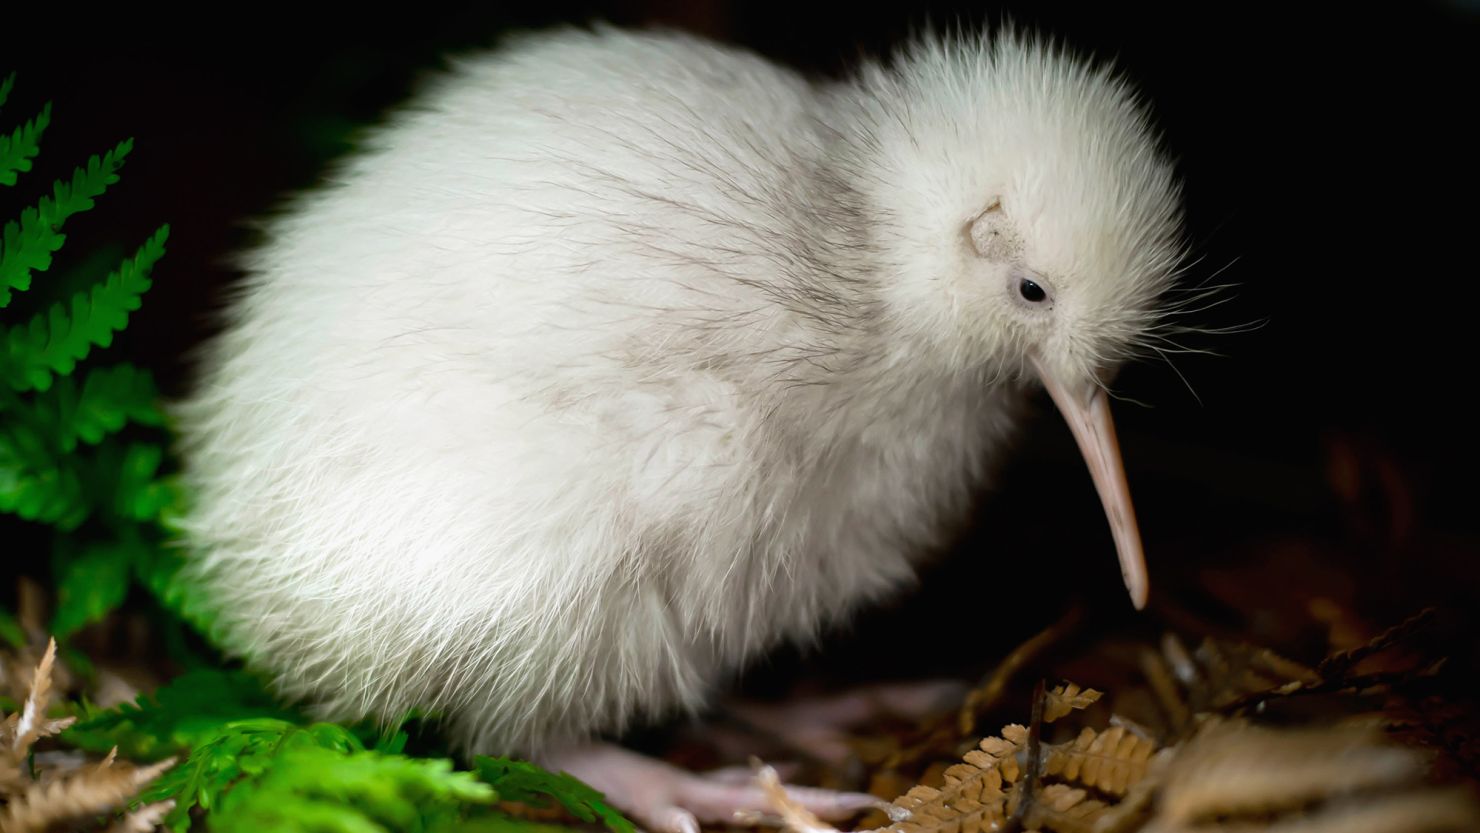 Manukura, pictured in 2011, was the first all-white kiwi born in captivity.